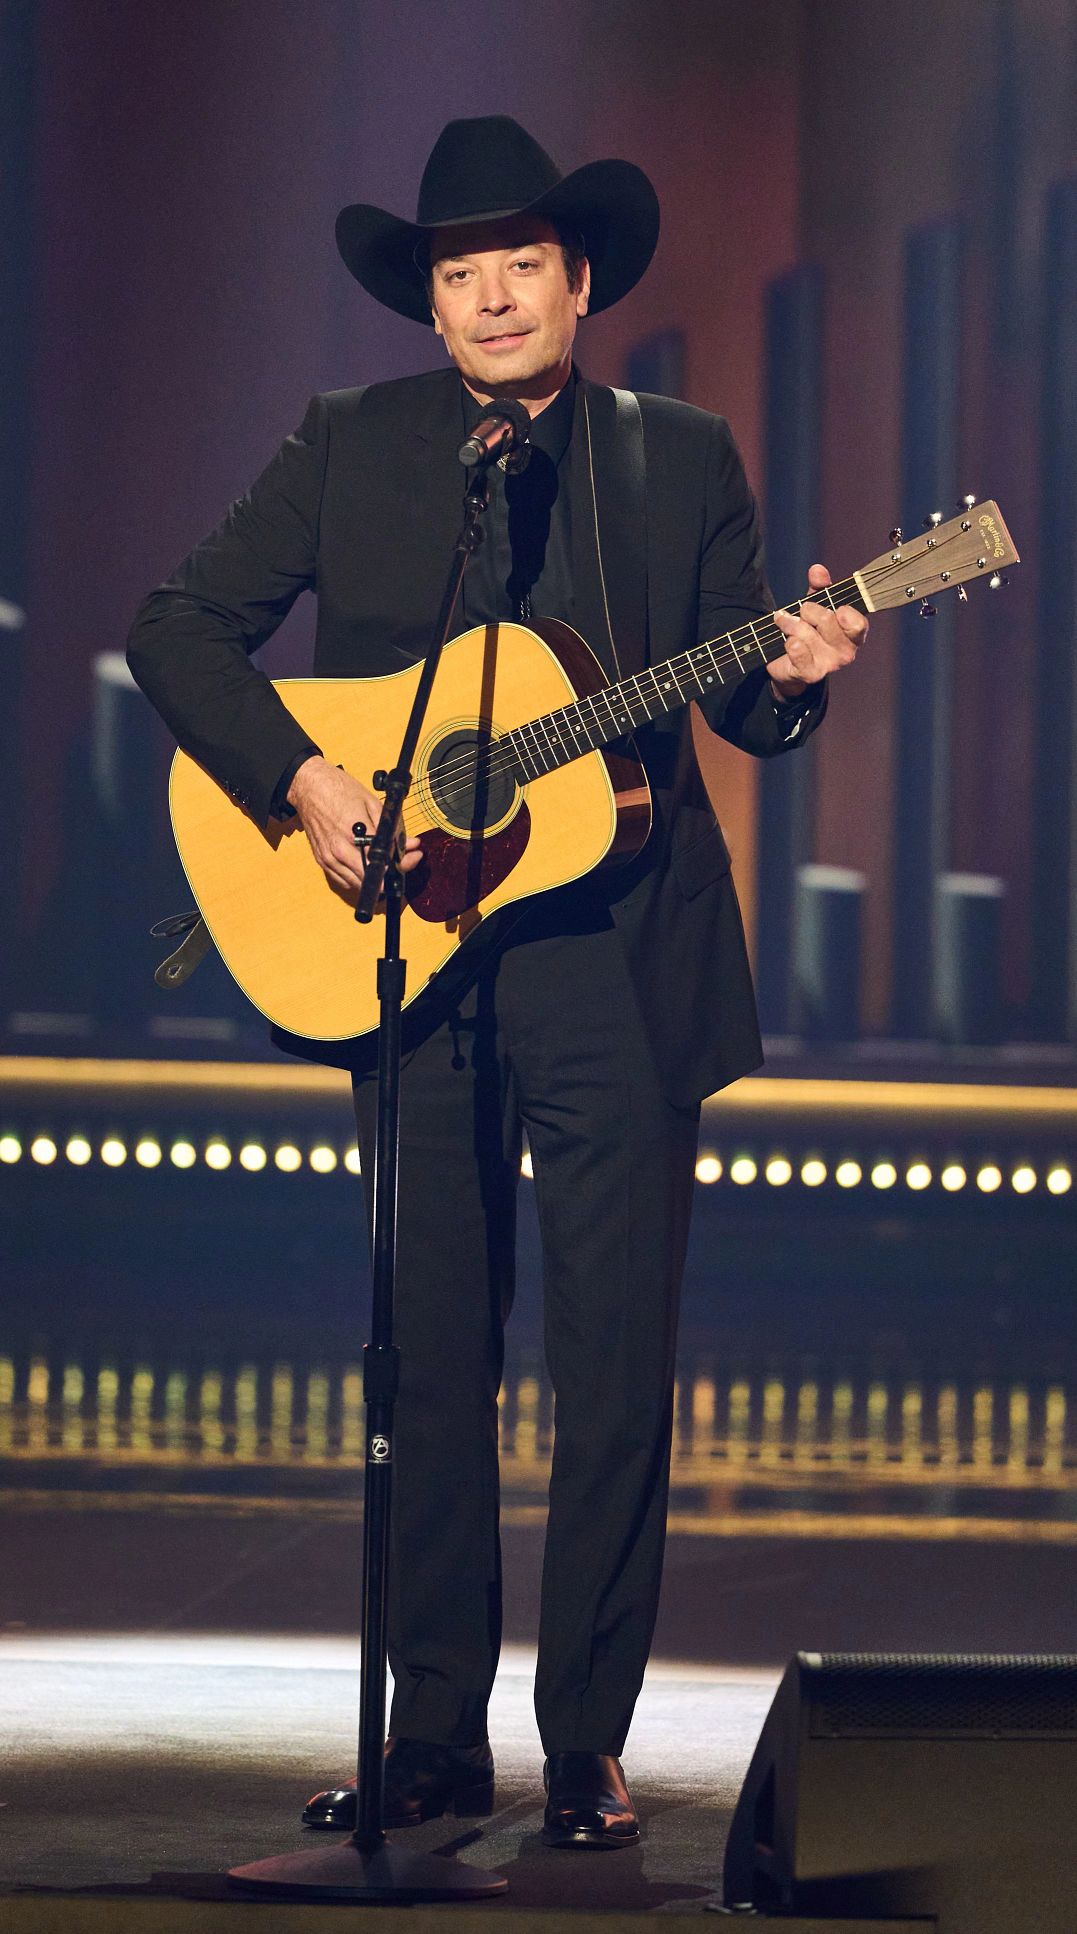 Jimmy Fallon wearing a country hat and playing an acoustic guitar onstage at the 25th Annual Mark Twain Prize For American Humor